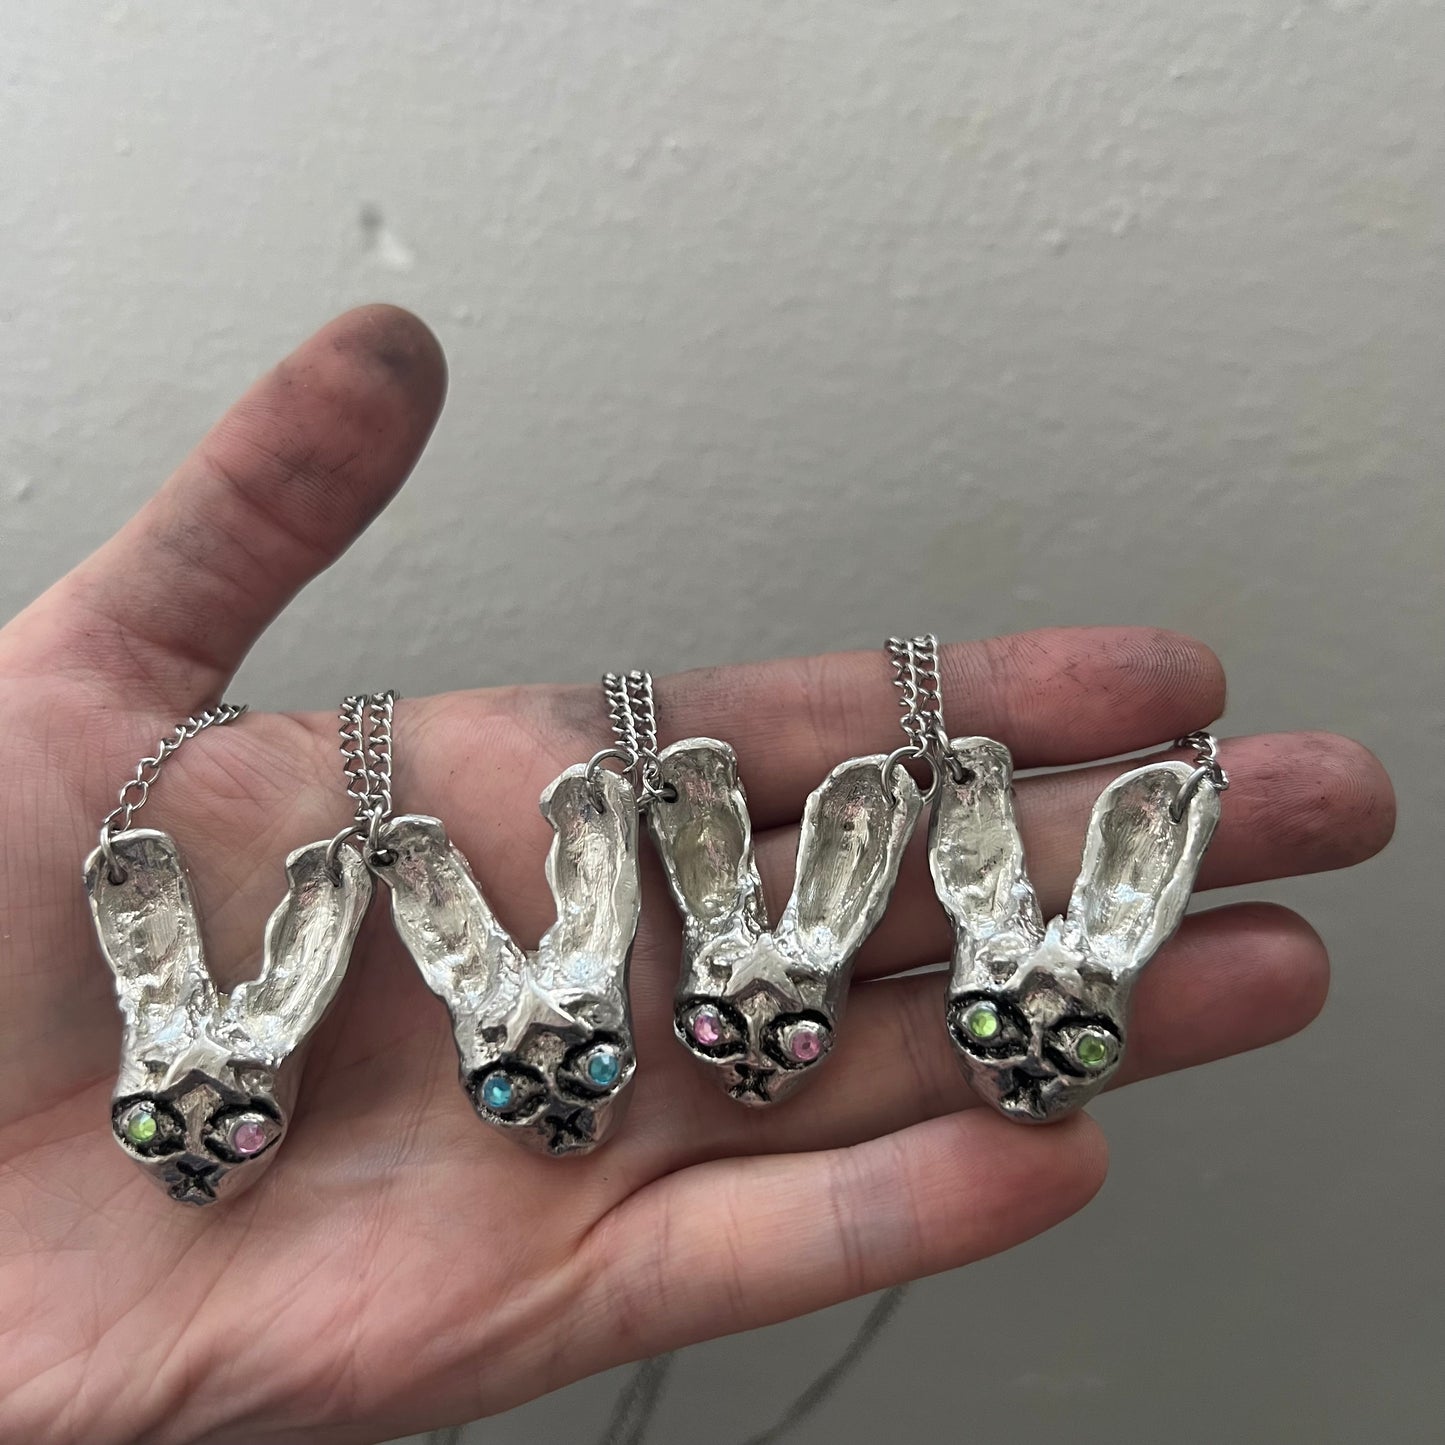 Astral Bunny Pendant